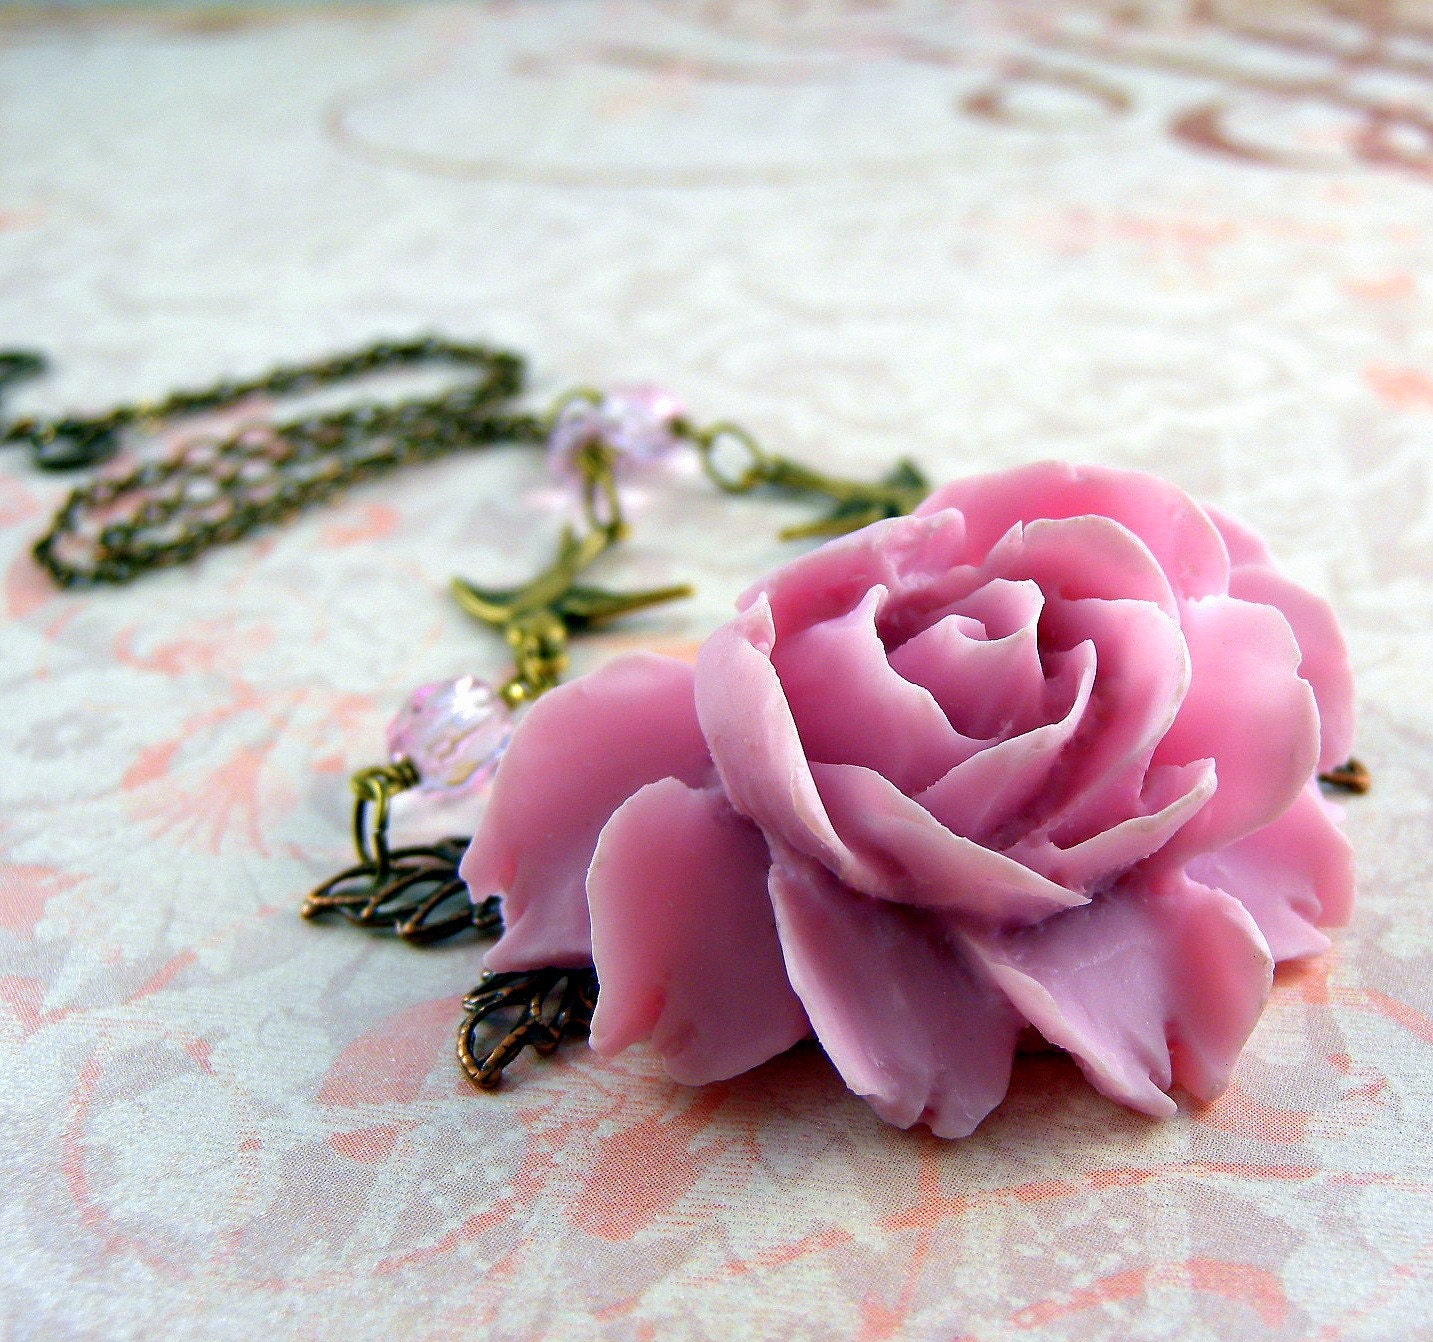 Handmade Jewelry on Etsy - Romantic Baby Pink Rose by decoratethediva